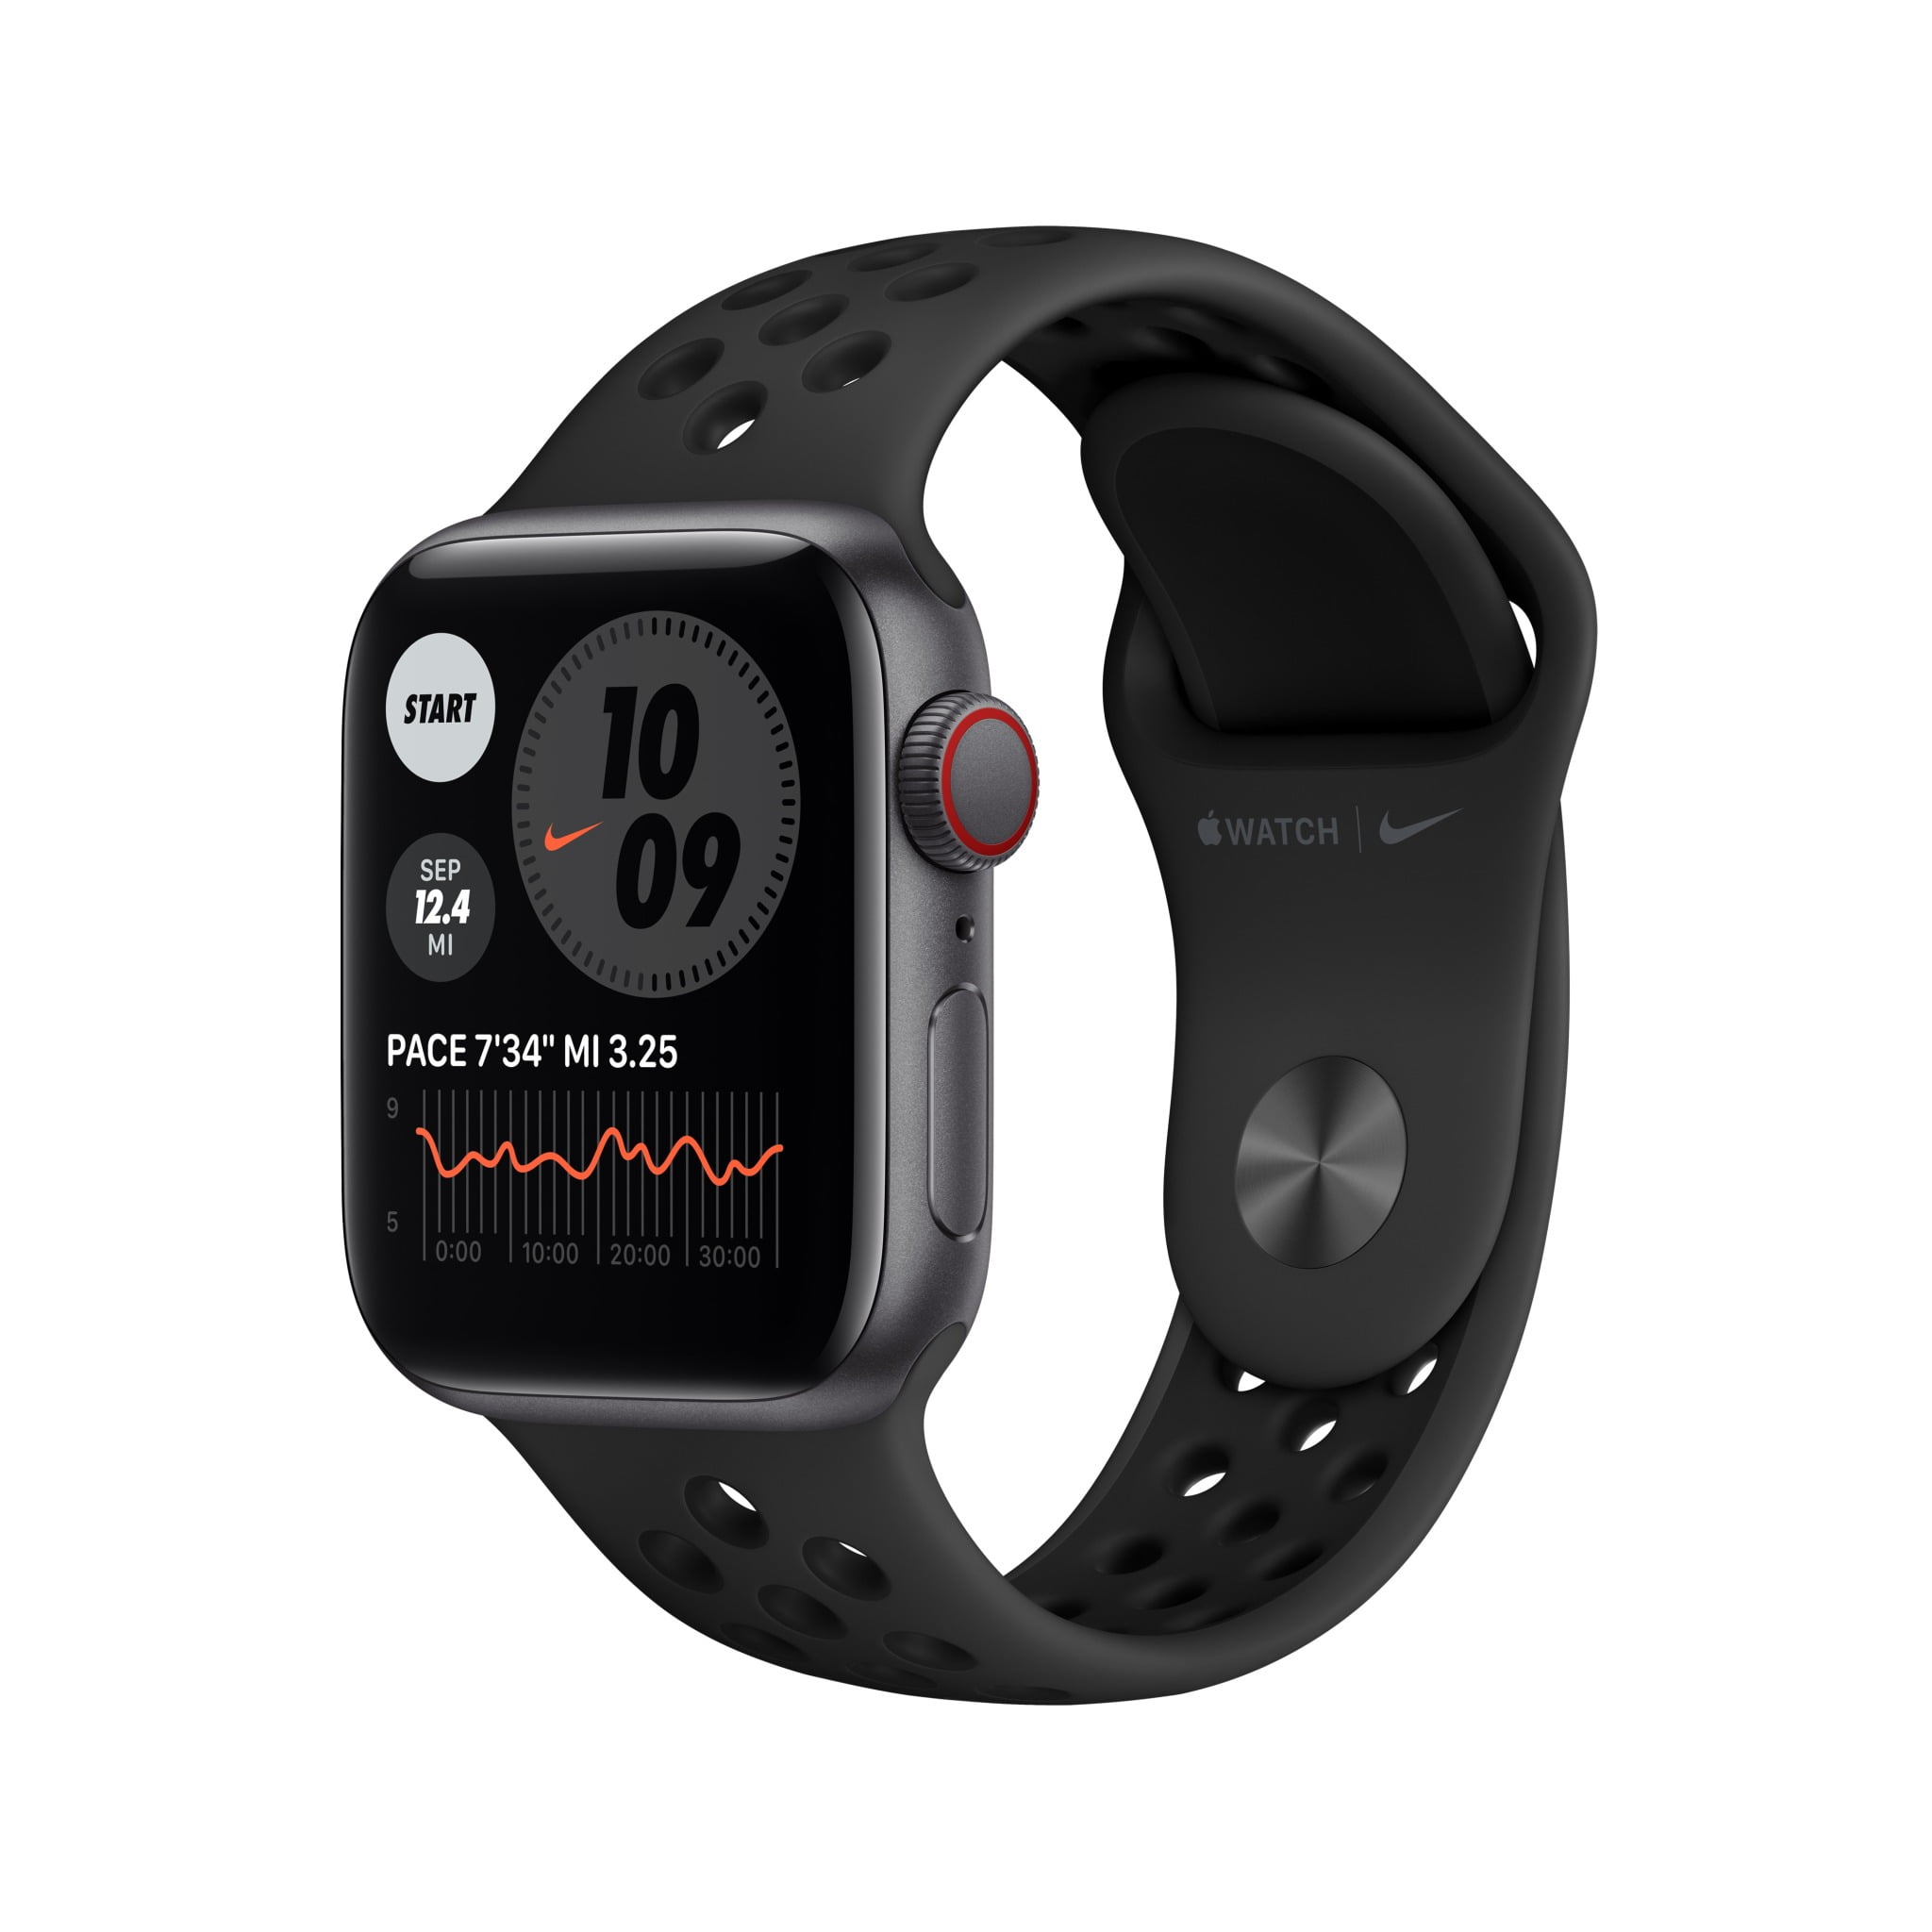 Apple Watch Nike SE + Cellular, 40mm Space Gray Aluminum Case with Anthracite/Black Nike Sport Band - Regular Walmart.com